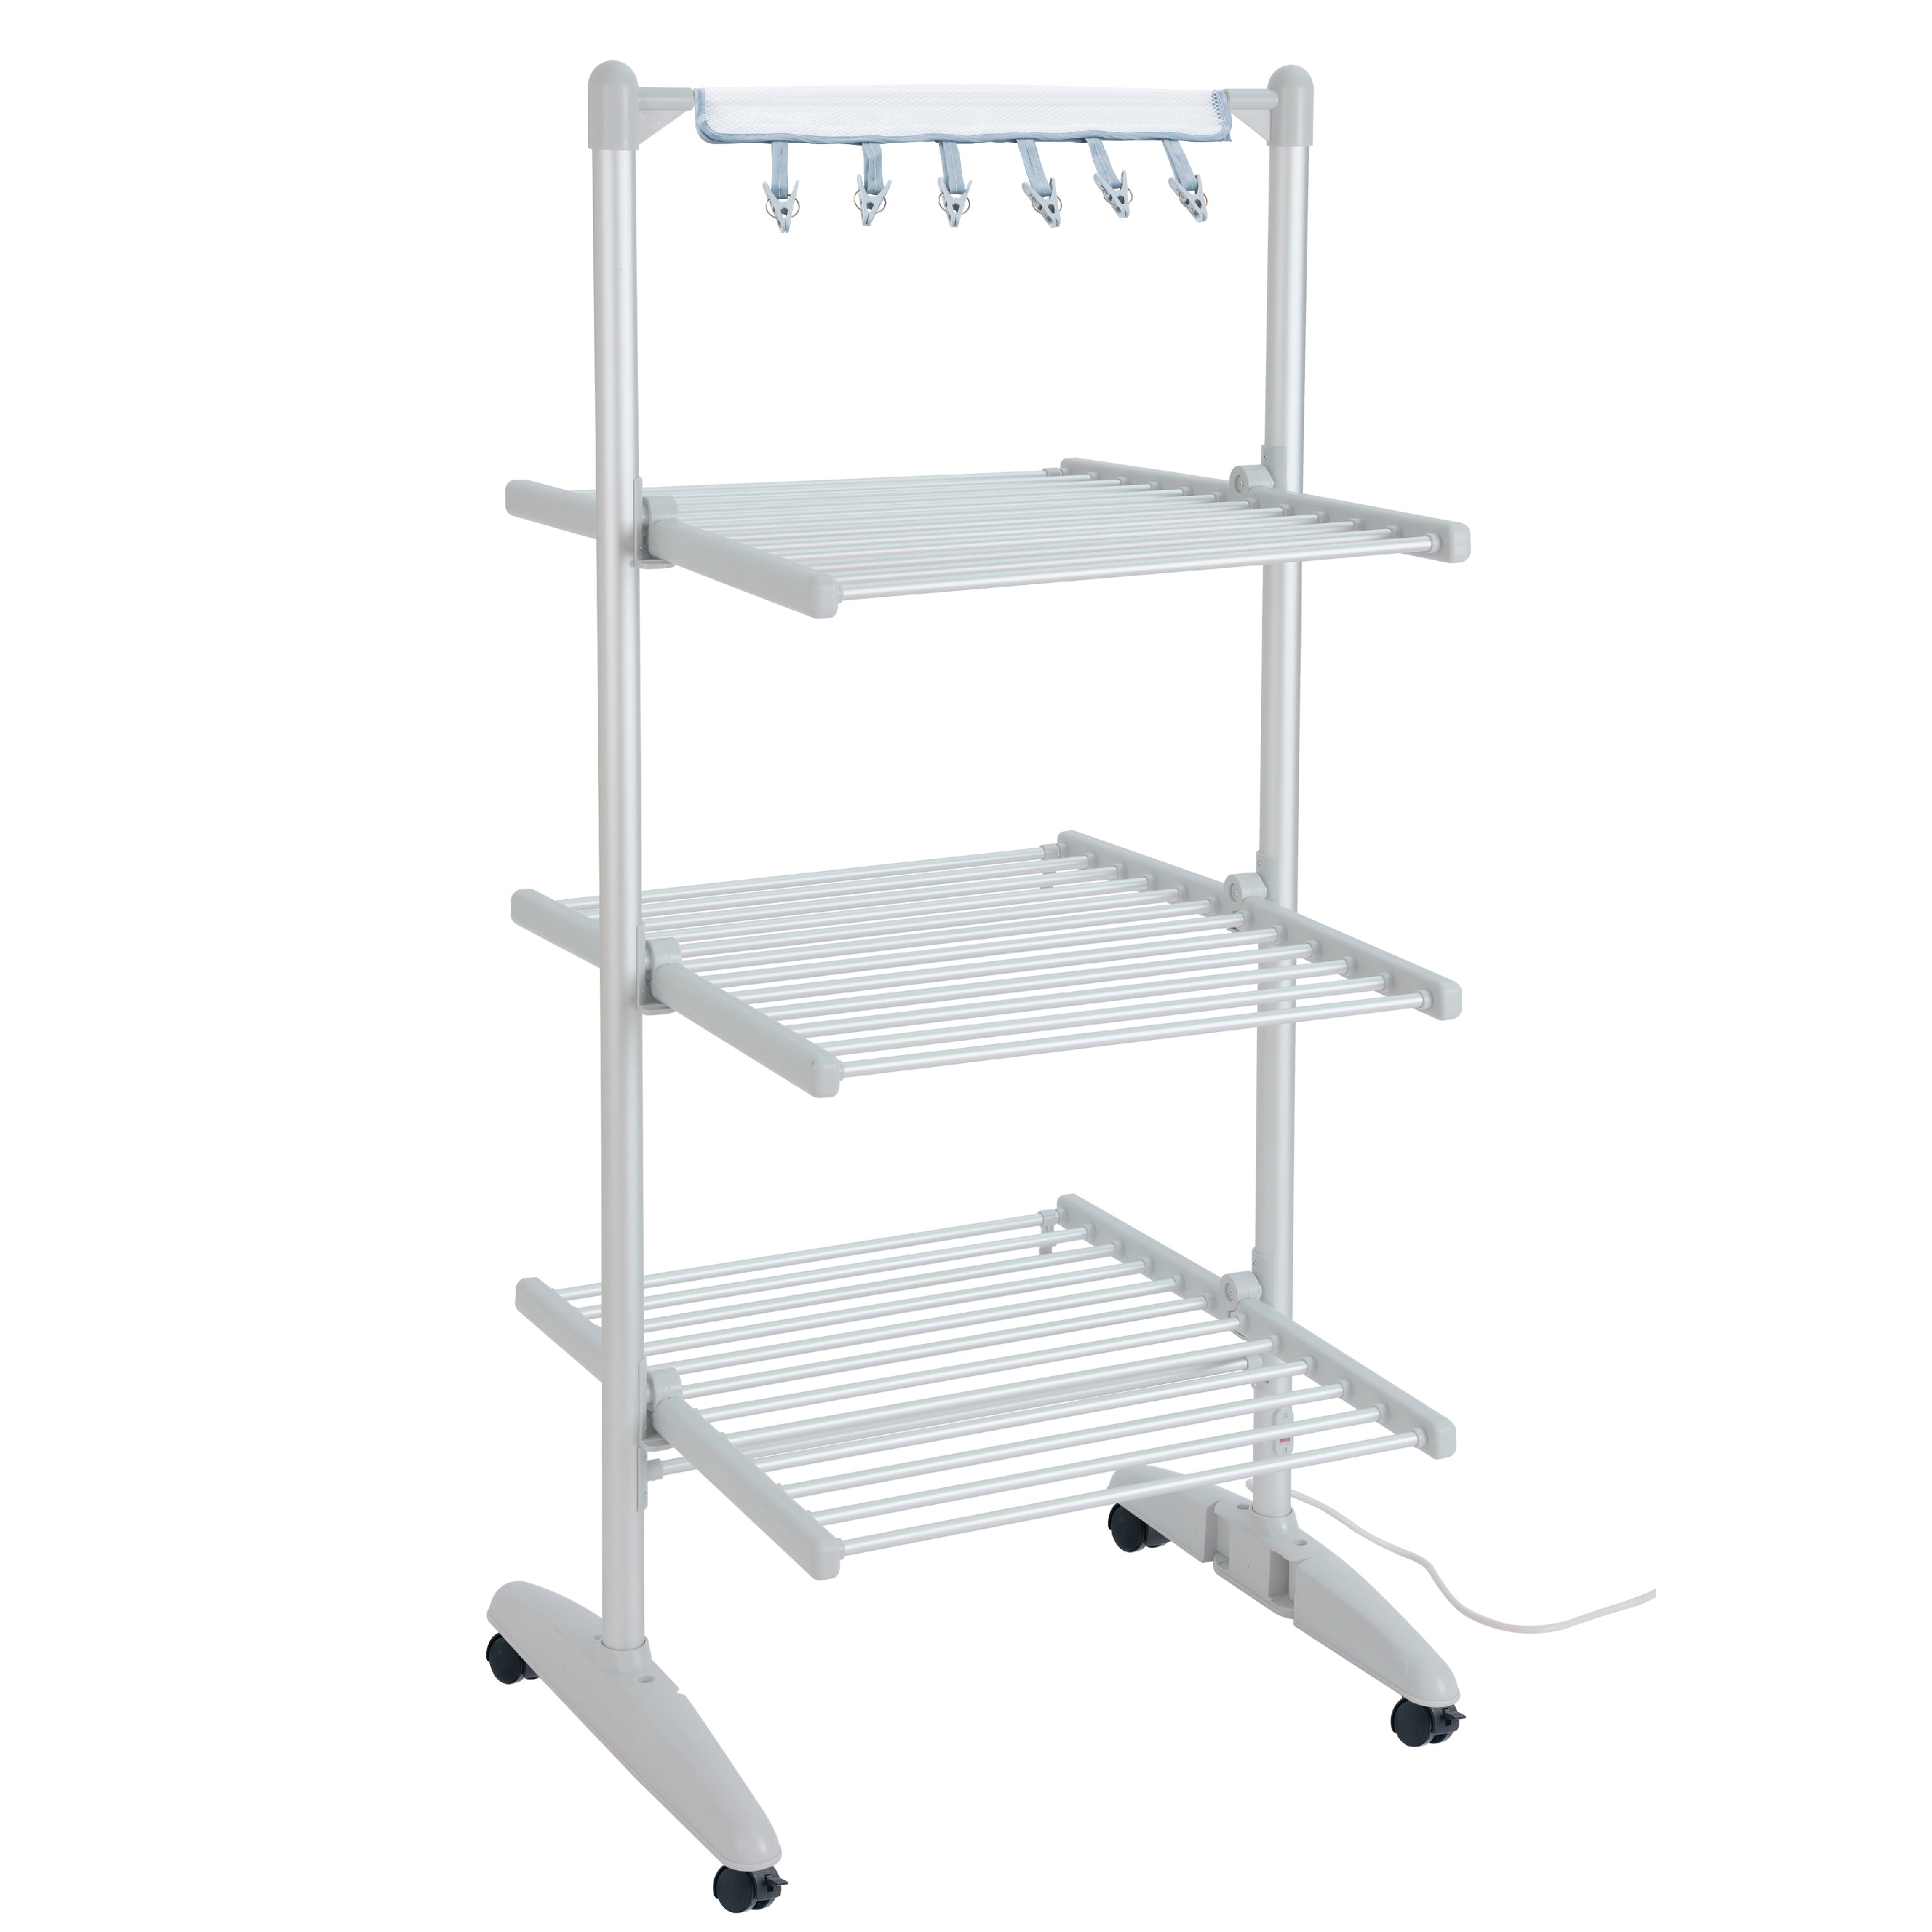 AMOS 300 Heated Electric Clothes Airer with Cover